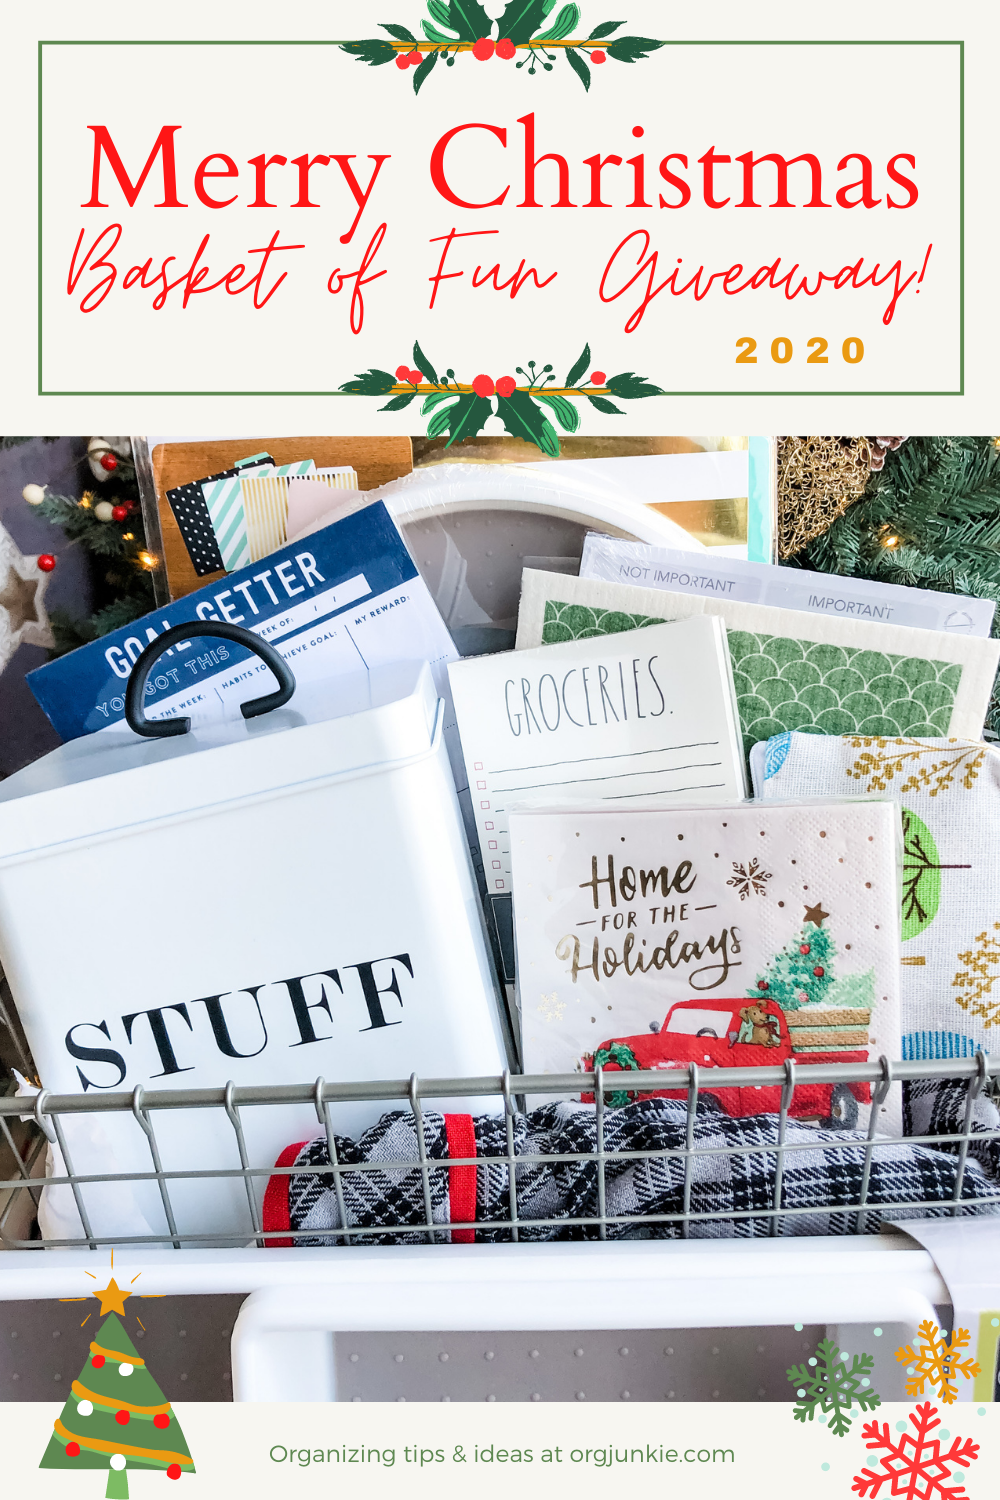 The 2020 Merry Christmas Basket of Fun Giveaway is Here! at I'm an Organizing Junkie blog